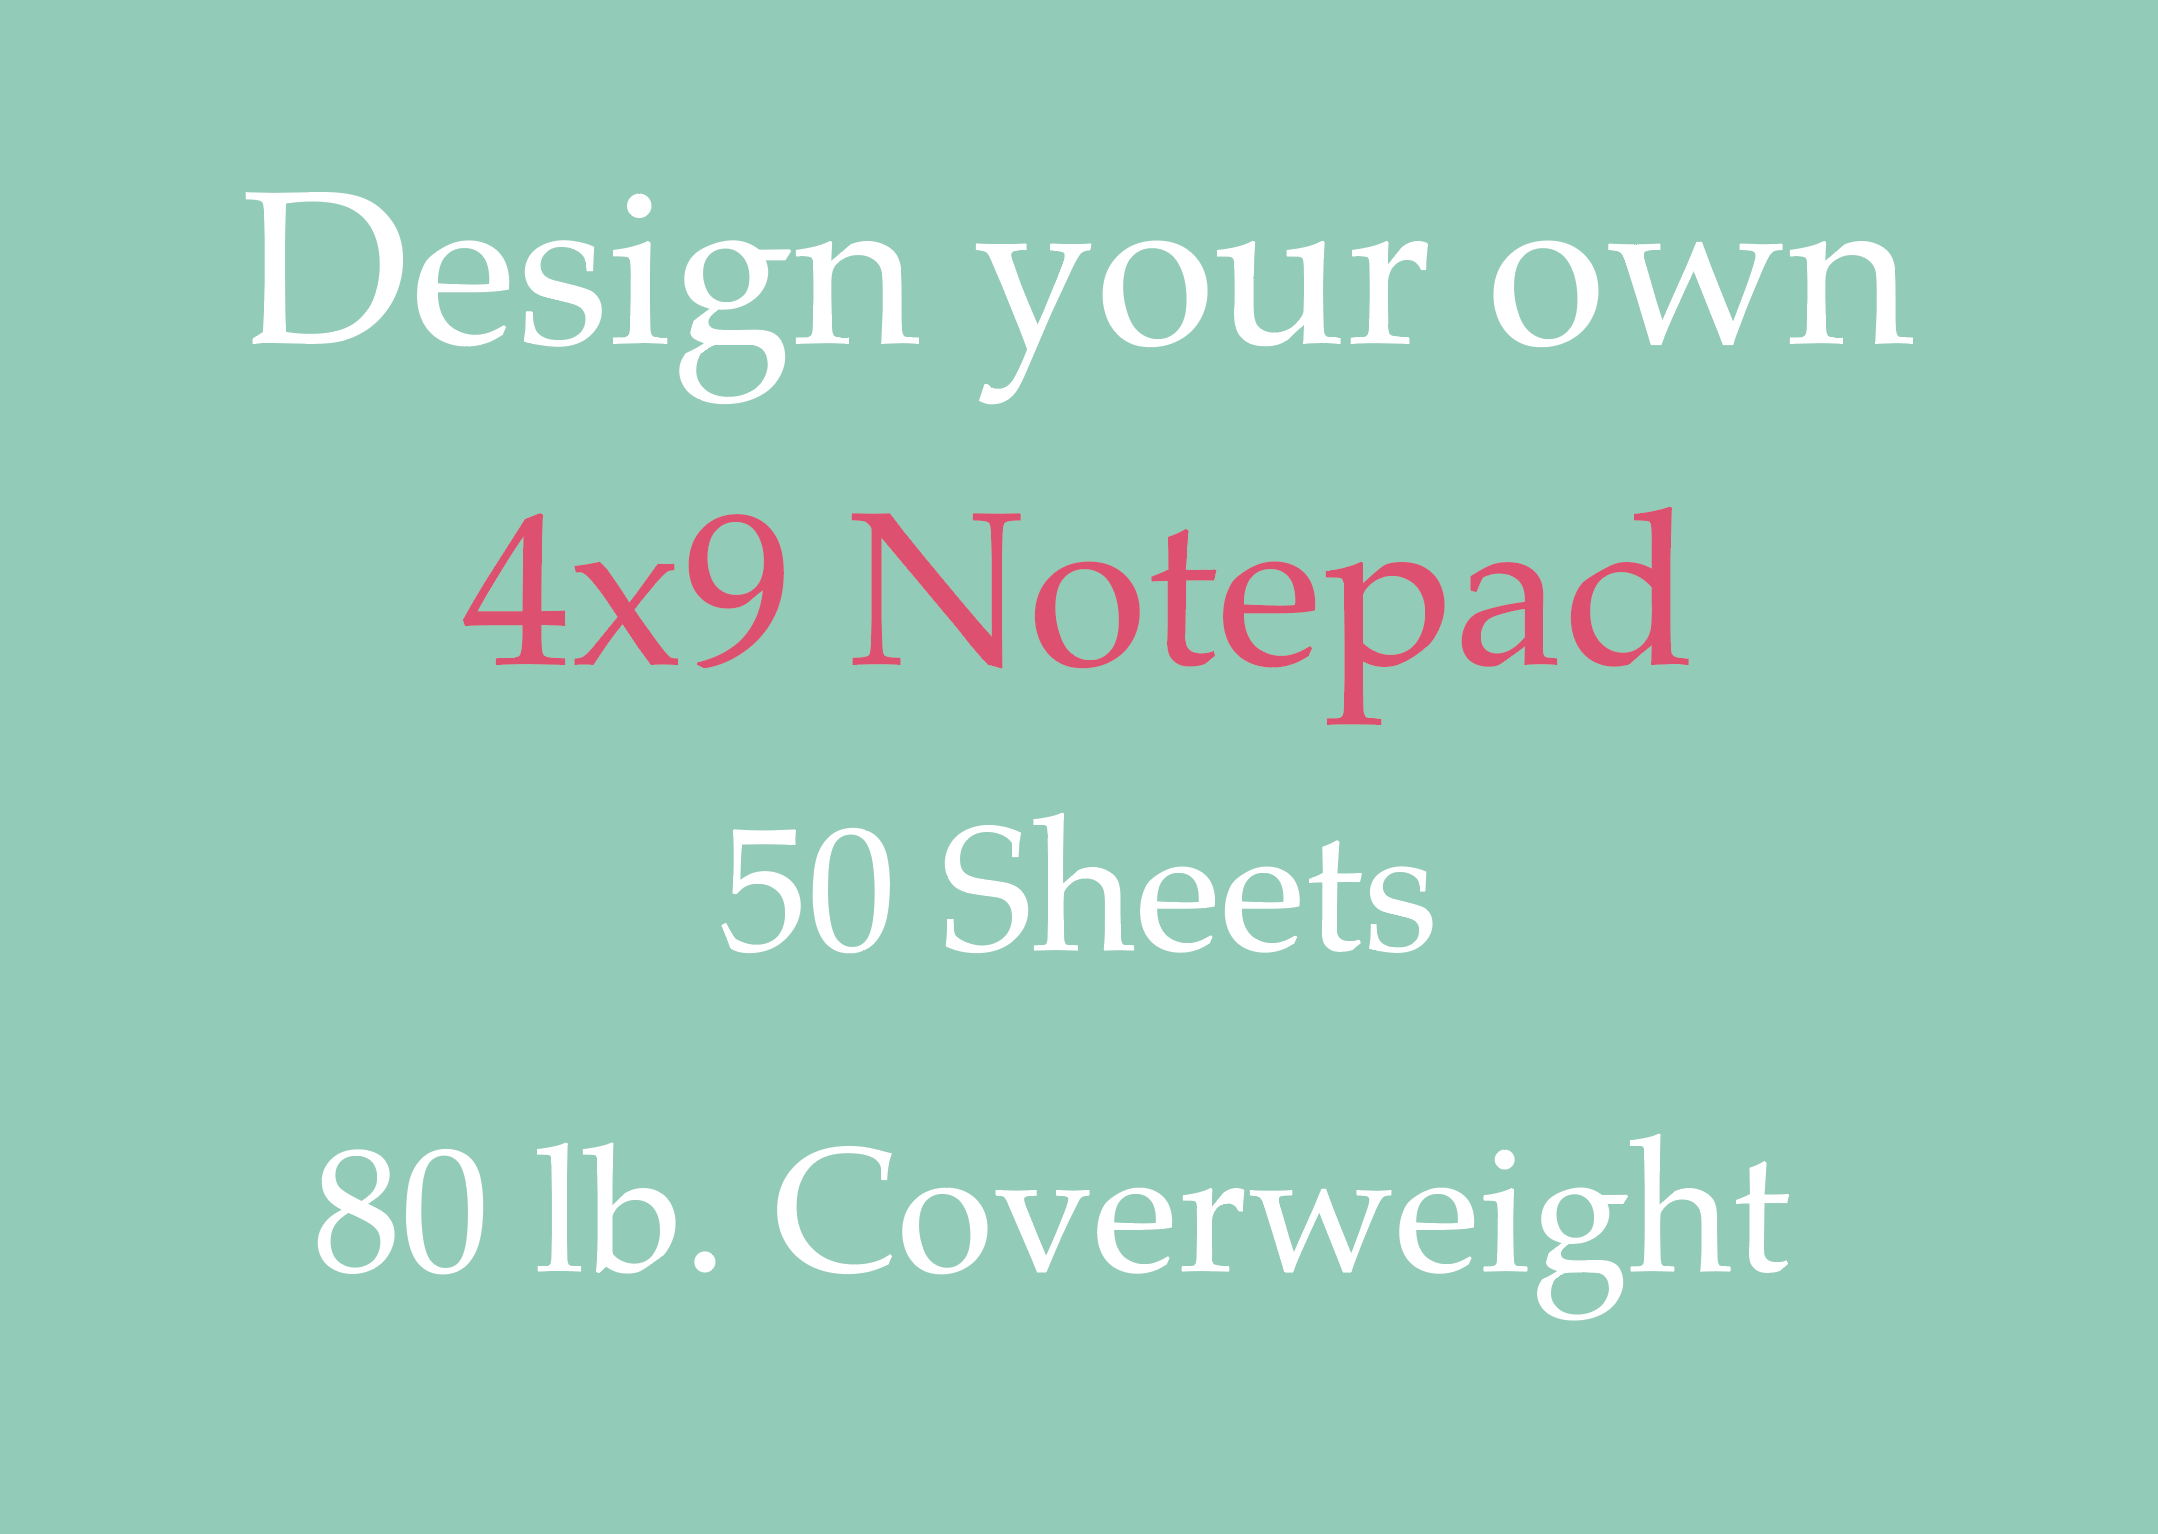 Design Your Own 4x9 Notepad (50 sheets 